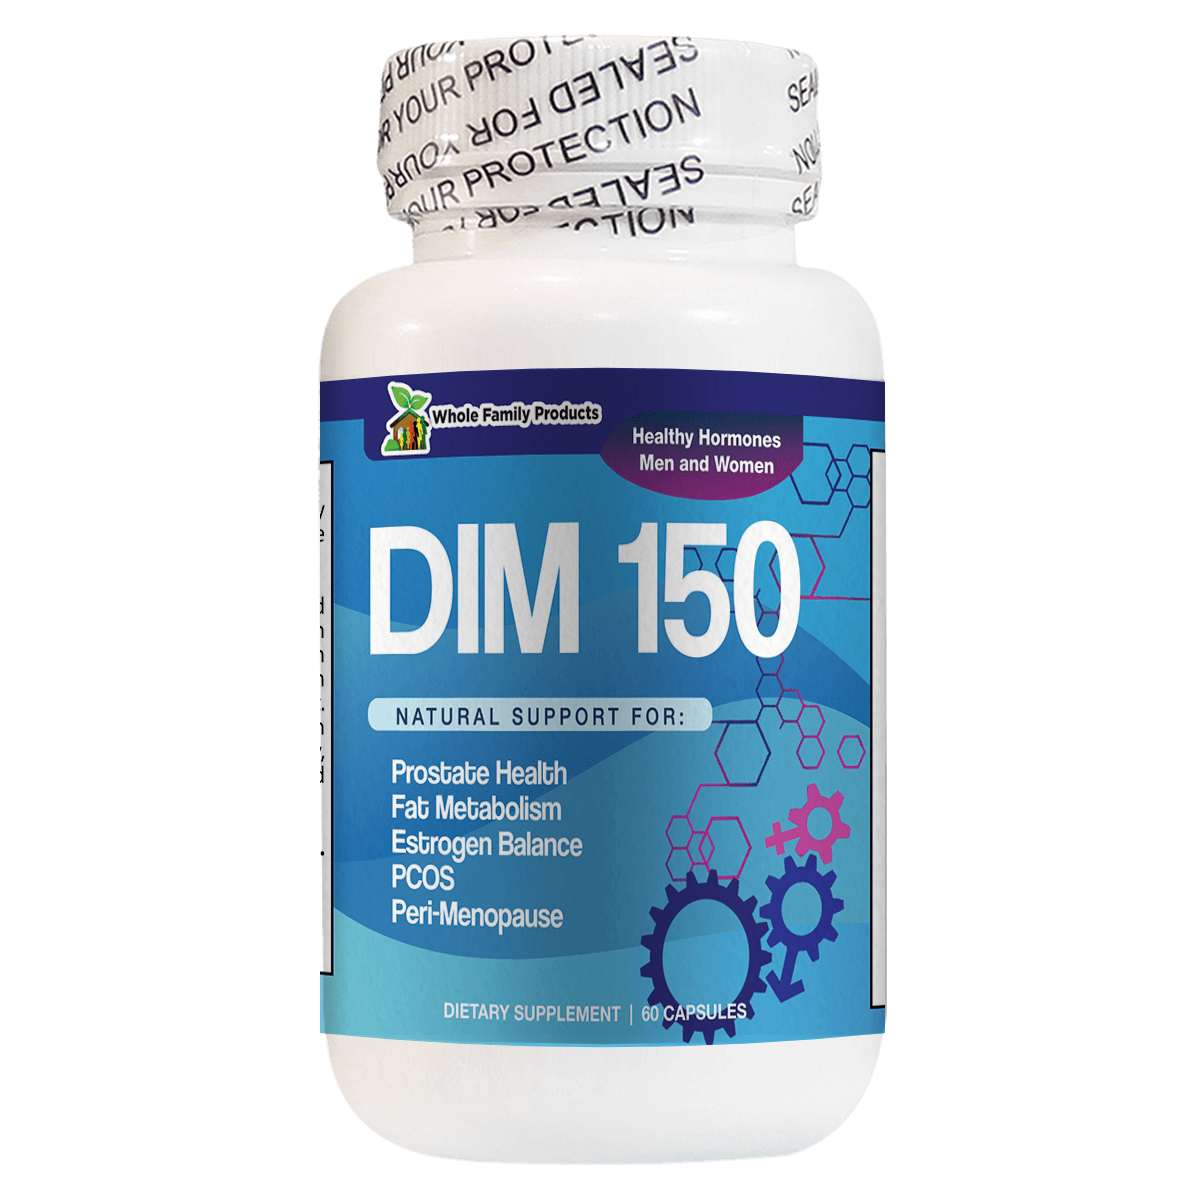 DIM 150 Natural Support for Prostate Health